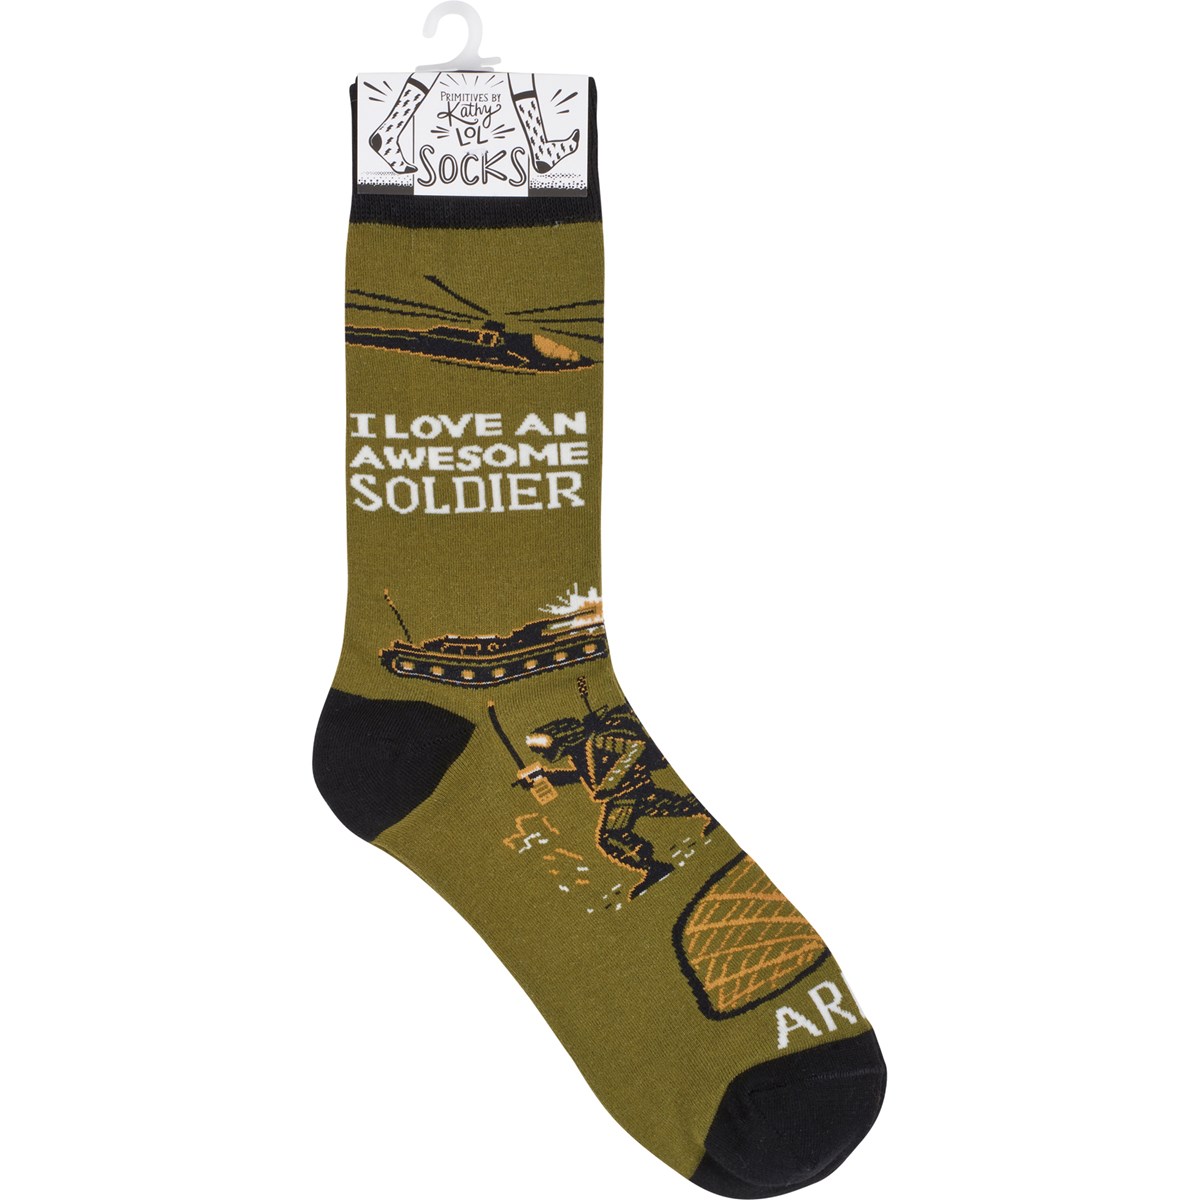 I Love An Awesome Soldier Socks - Cotton, Nylon, Spandex